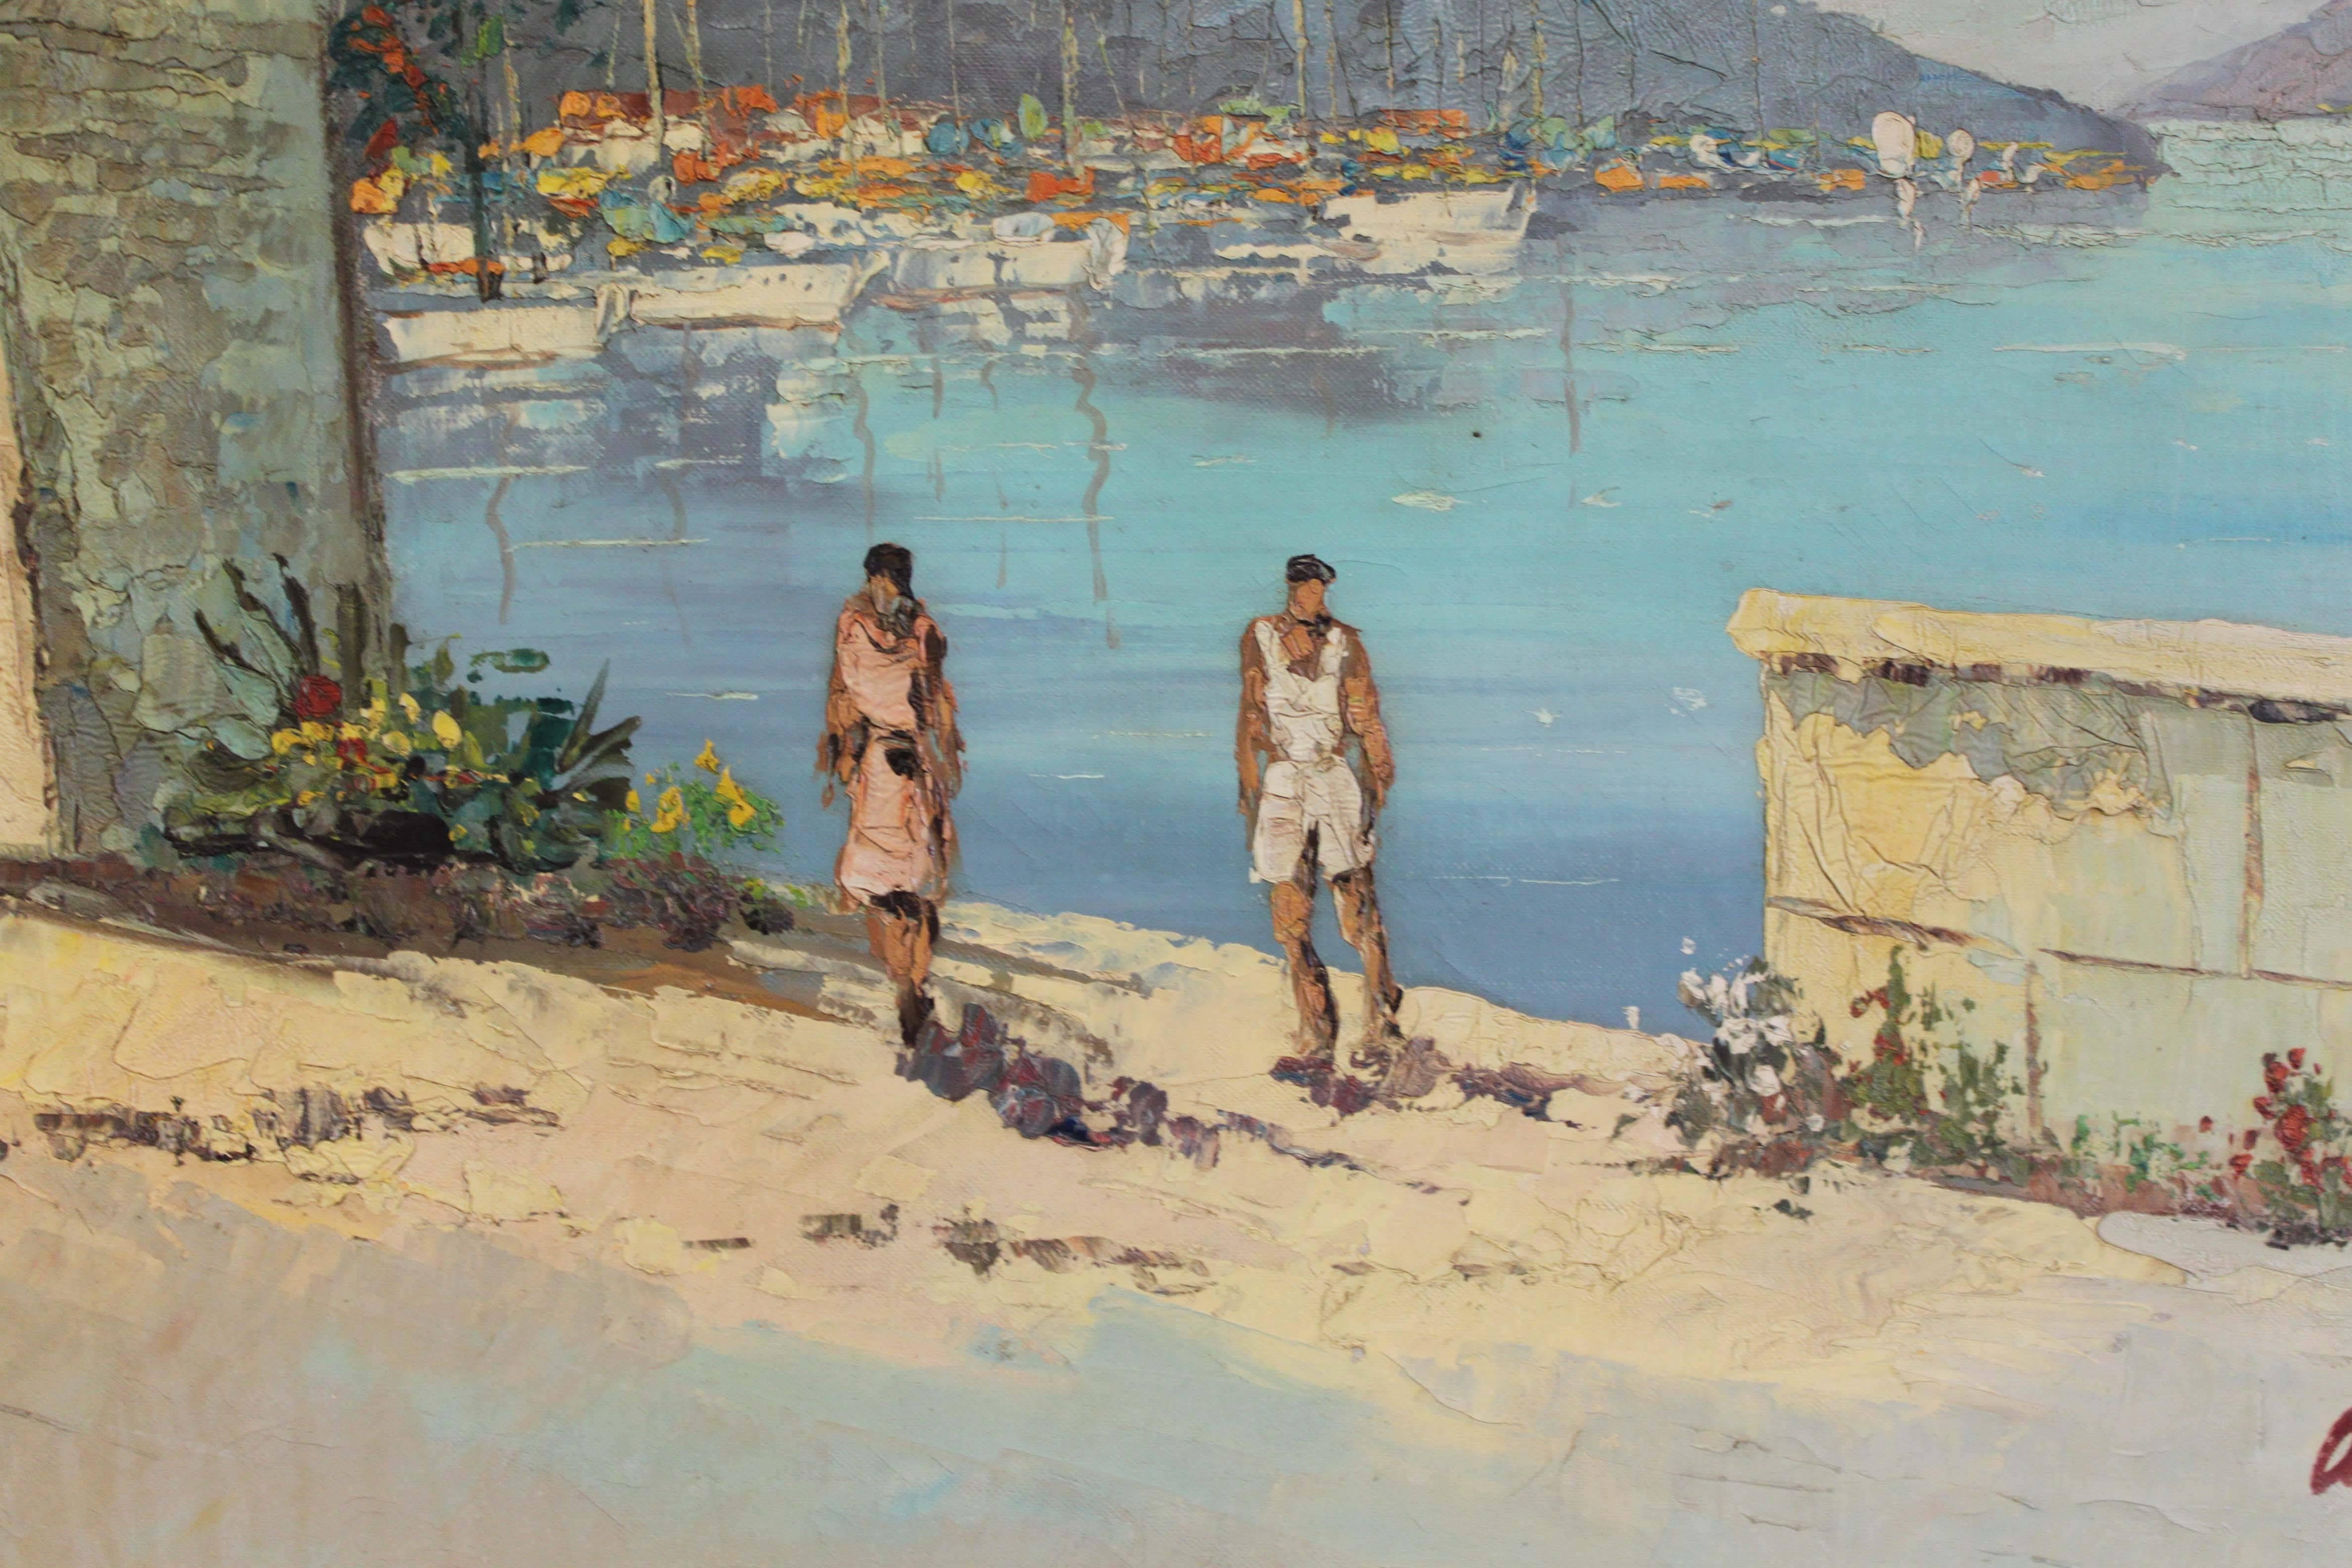 A wonderful midcentury painting of a beach, indistinctly signed at lower right. Appears to be in original condition with period frame.